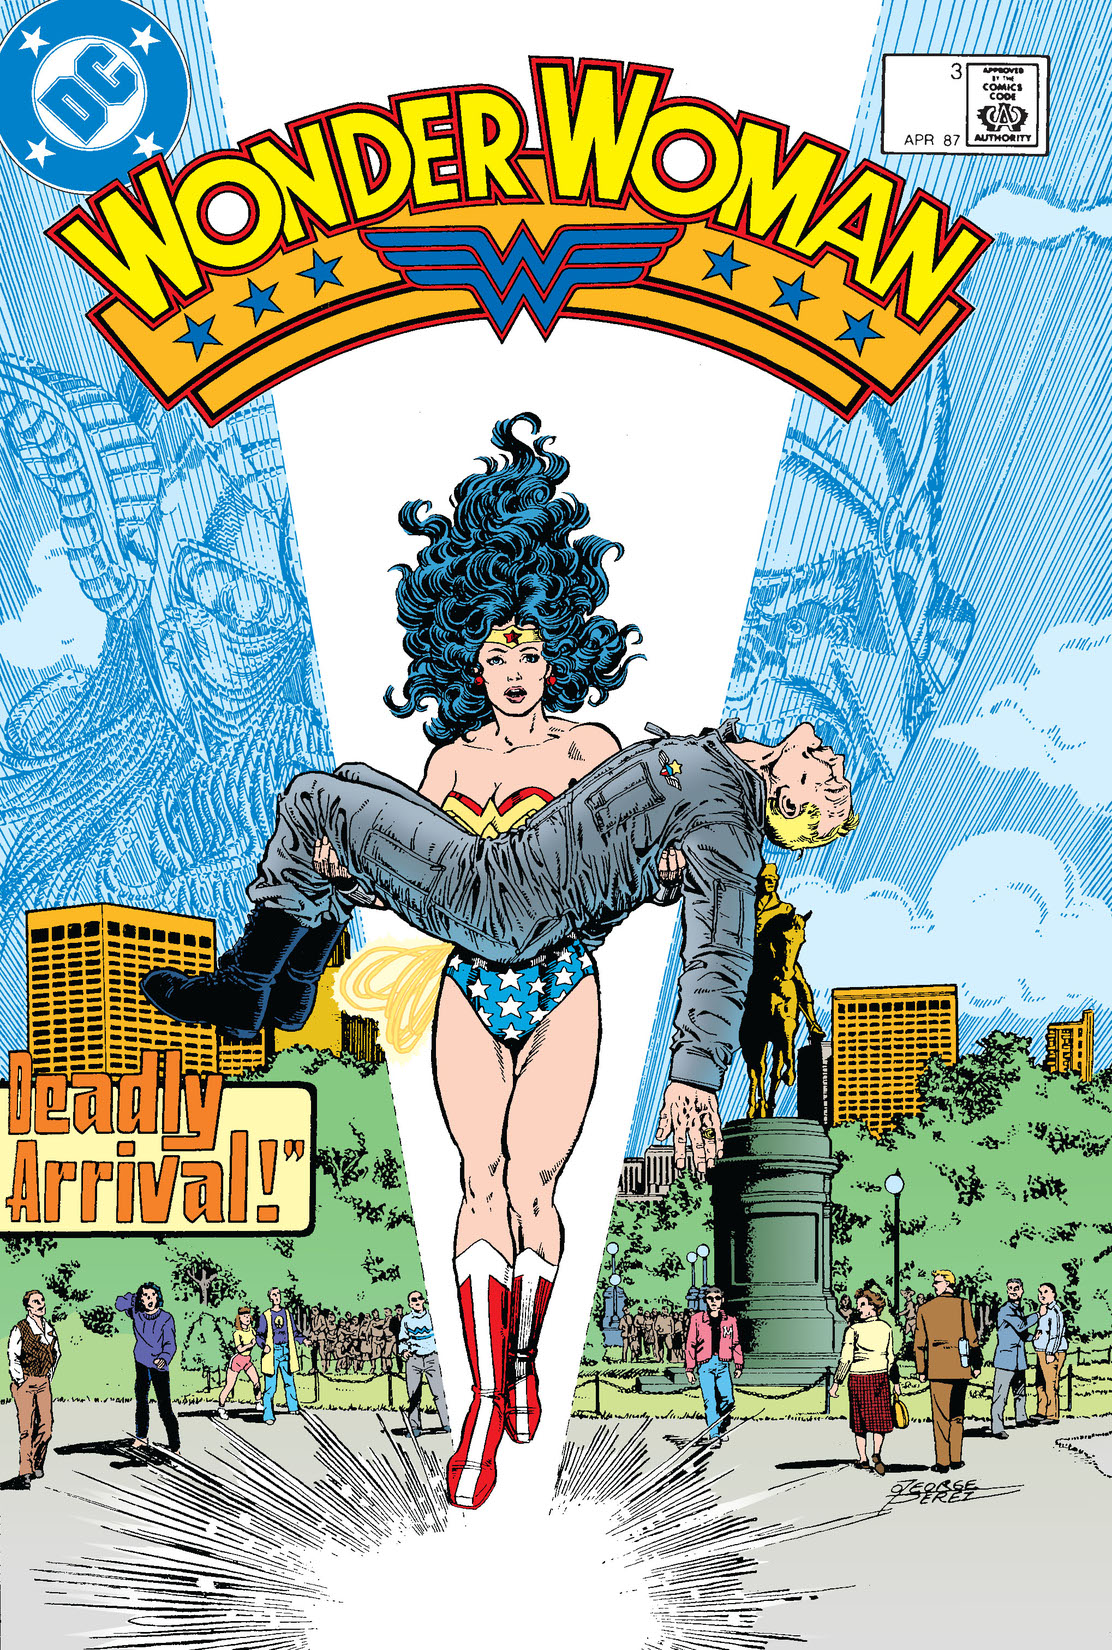 Wonder Woman (1986-2006) #3 preview images